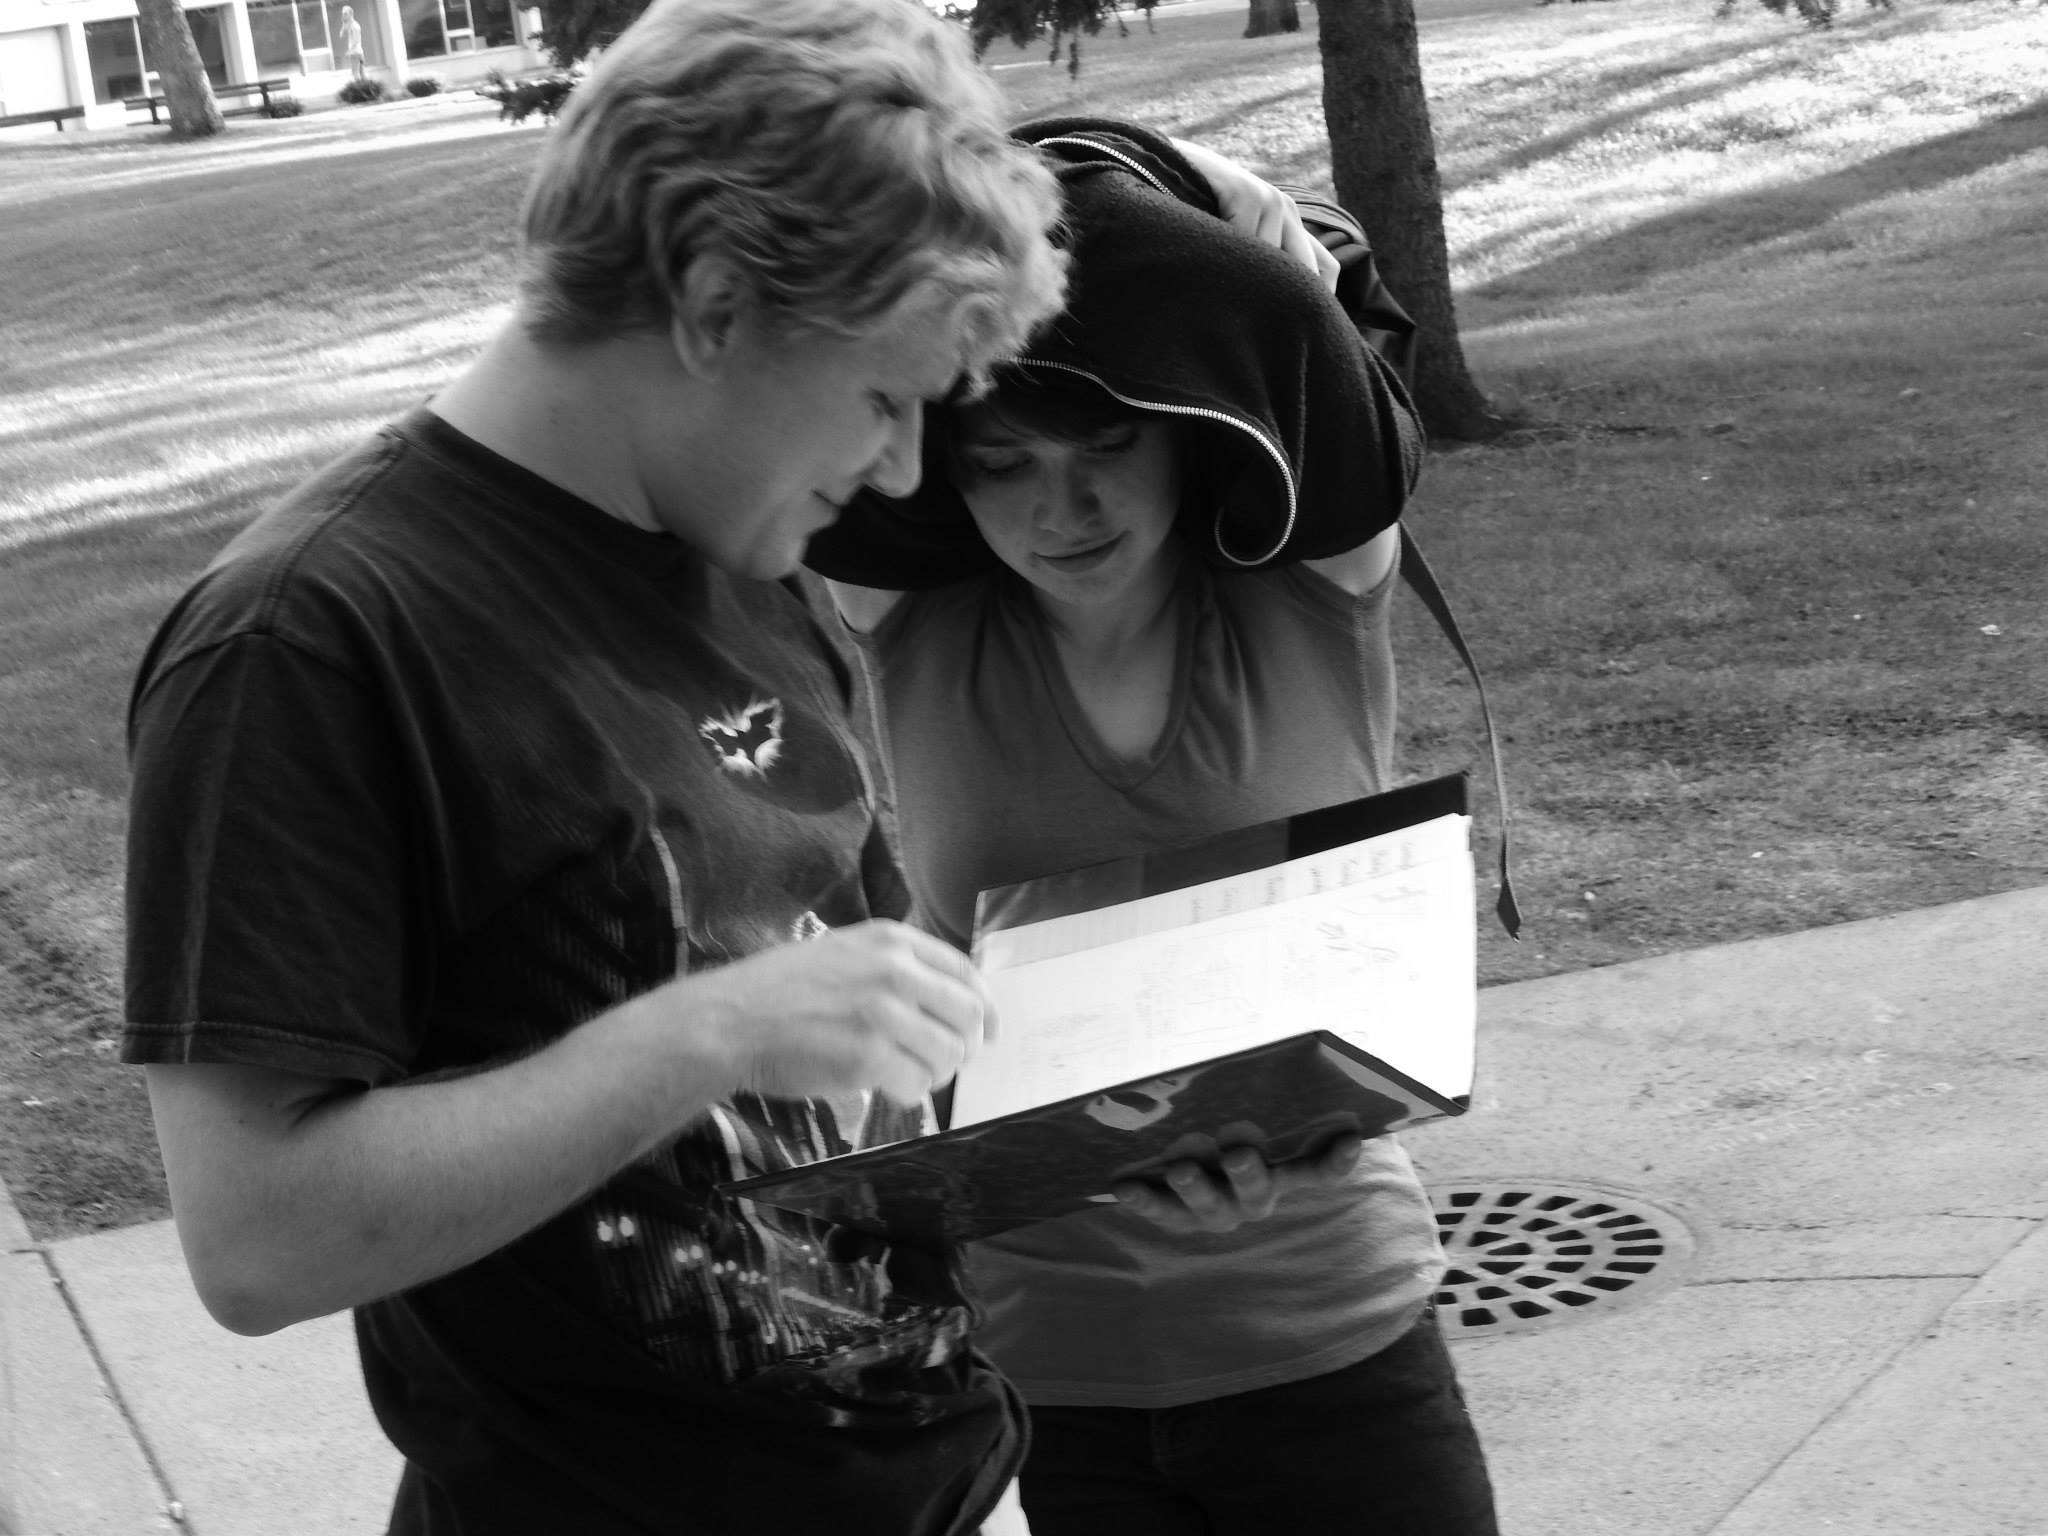  Director C.B. Jacobson and star Lindsay Kay examining the script on the set of "Fine" (photo by Joe Barden) 